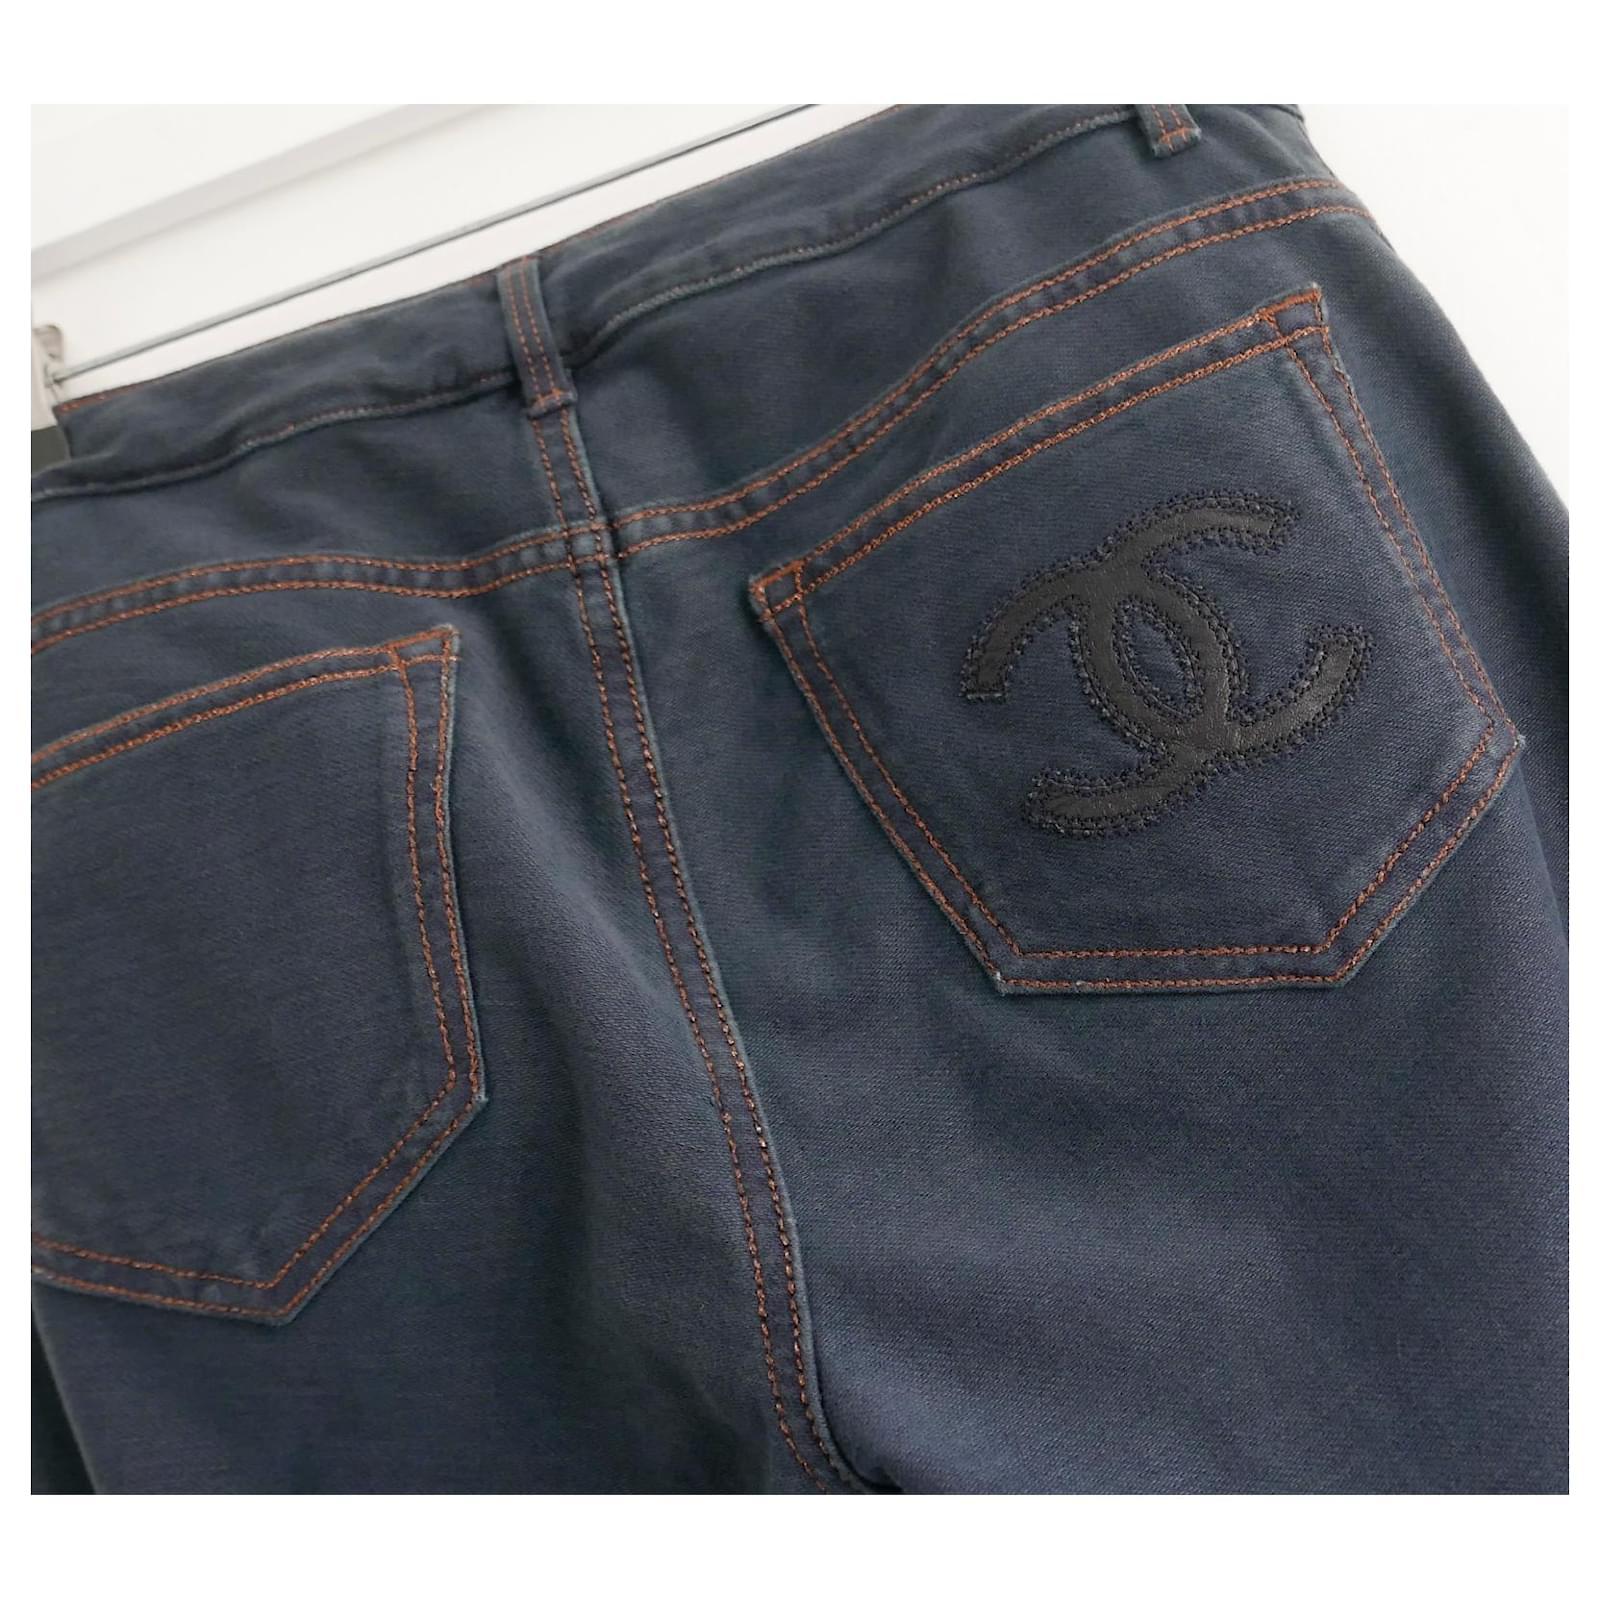 Chanel Pre-Fall 2011 Paris-Byzance CC Logo Pocket Jeans In New Condition For Sale In London, GB